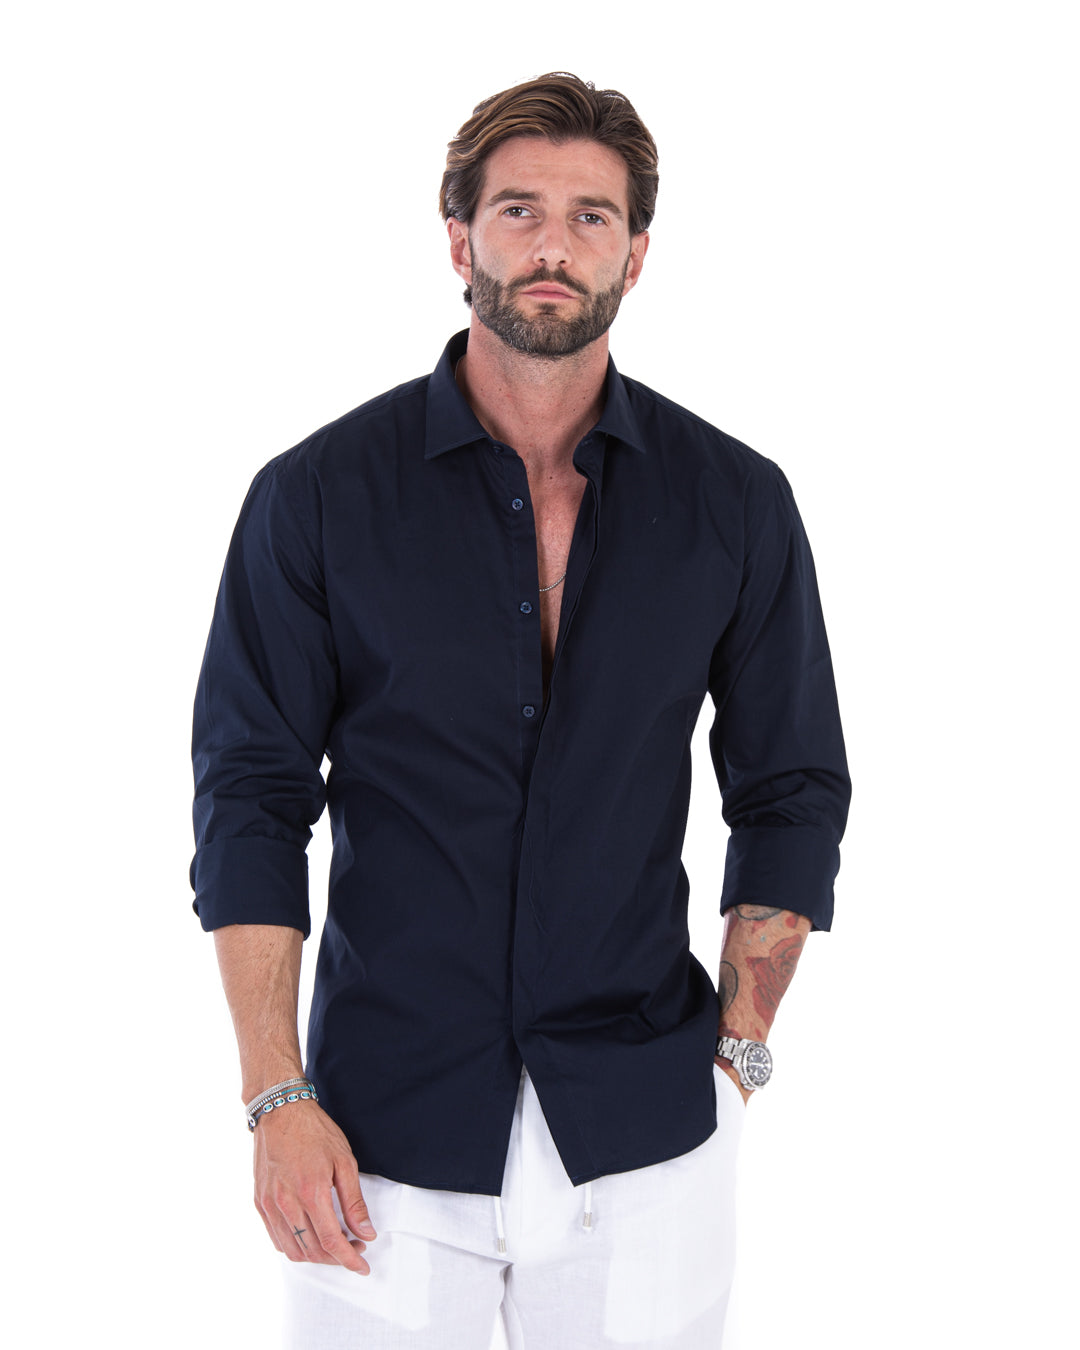 Shirt - classic blue basic in cotton